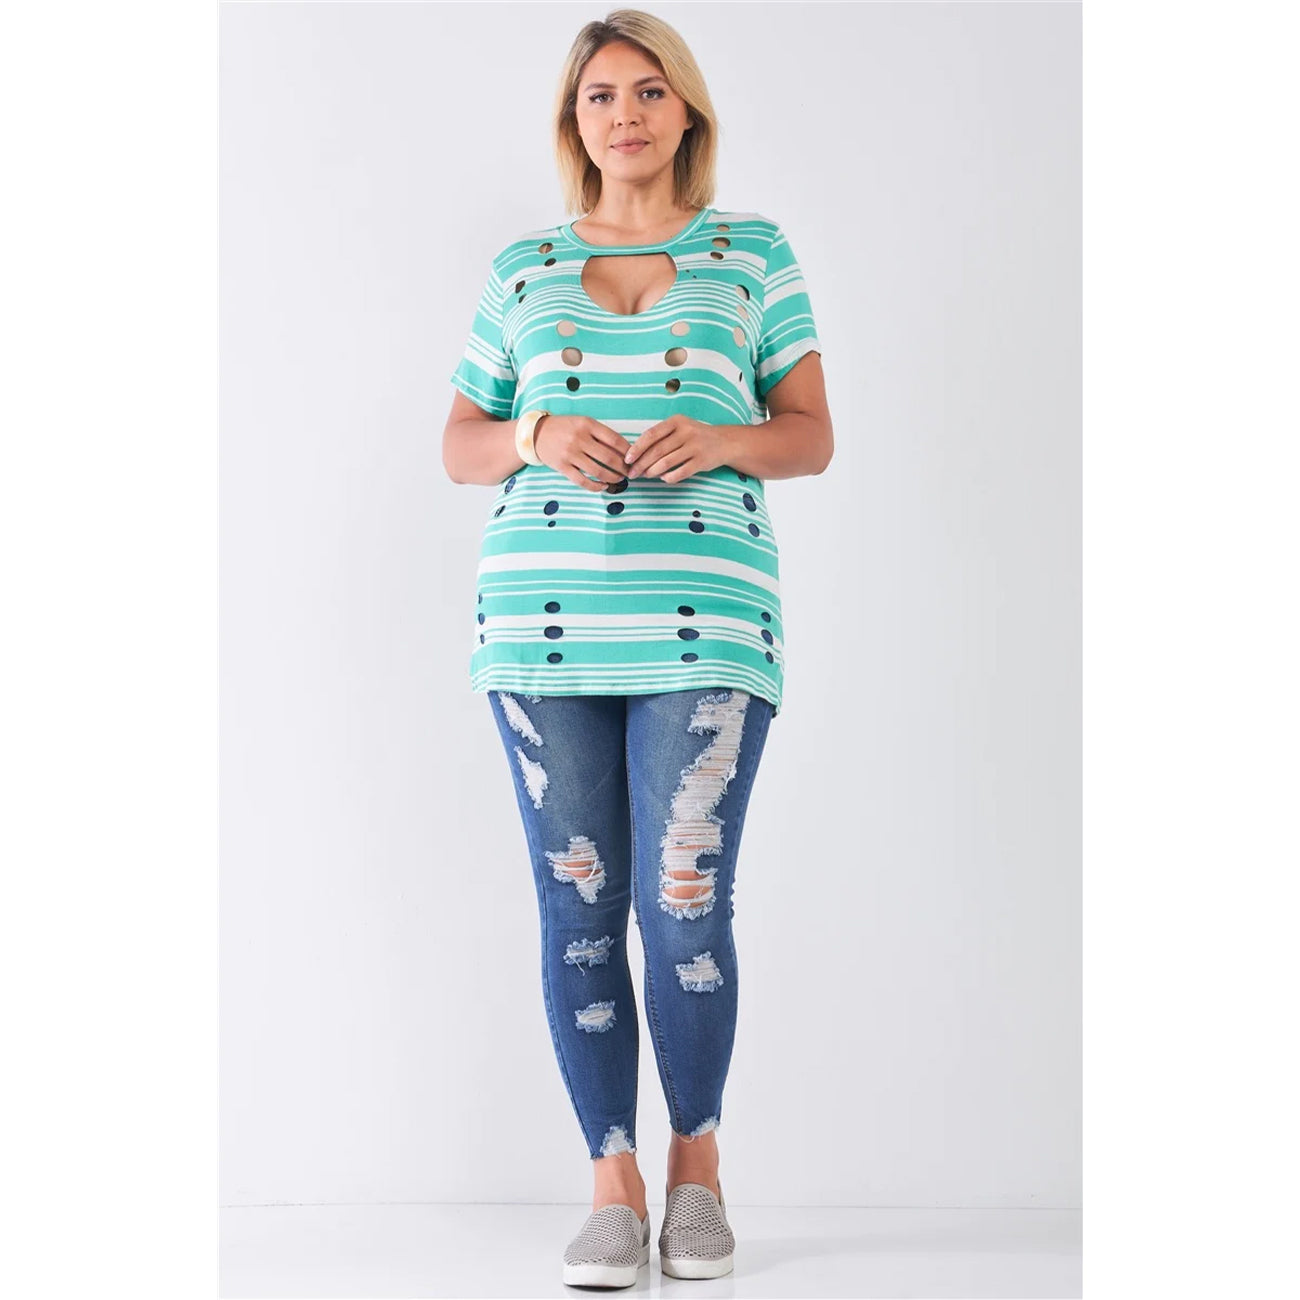 Plus Striped And Distressed Cut-out Women's Top